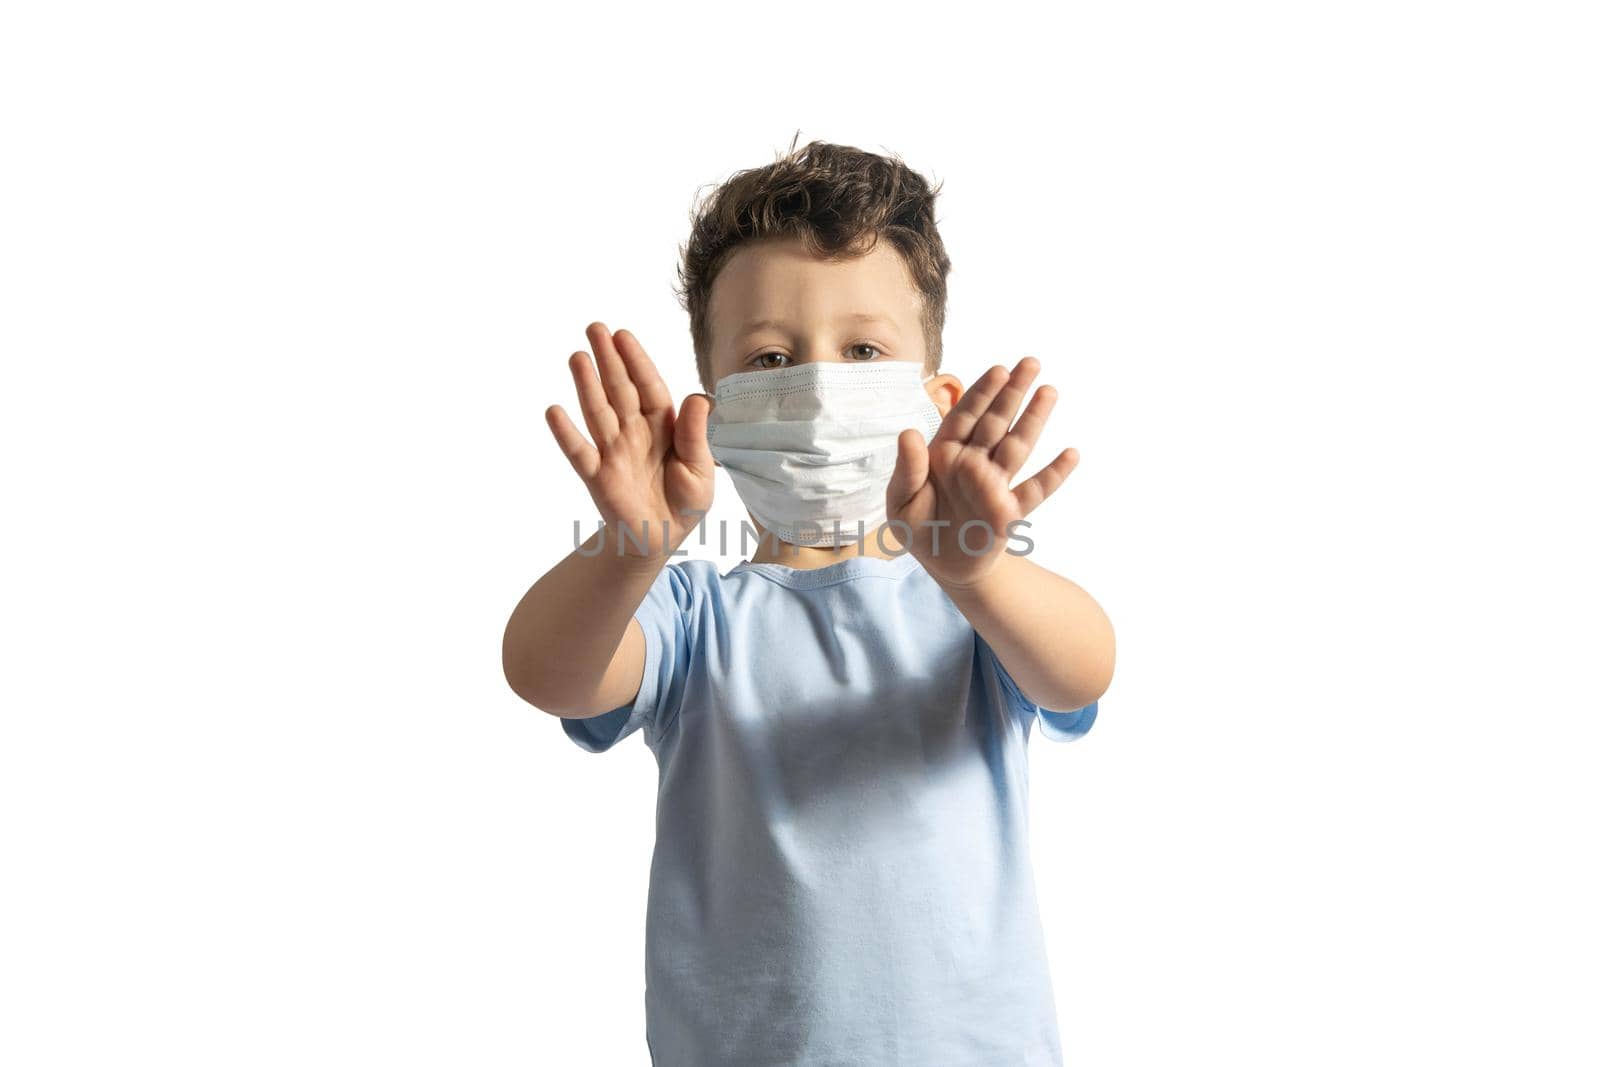 Concept of coronavirus quarantine. Child wearing medical protective mask during flu virus, making stop gesture. COVID-19. Small white boy doing stop sign with his hands, isolated on white by uspmen